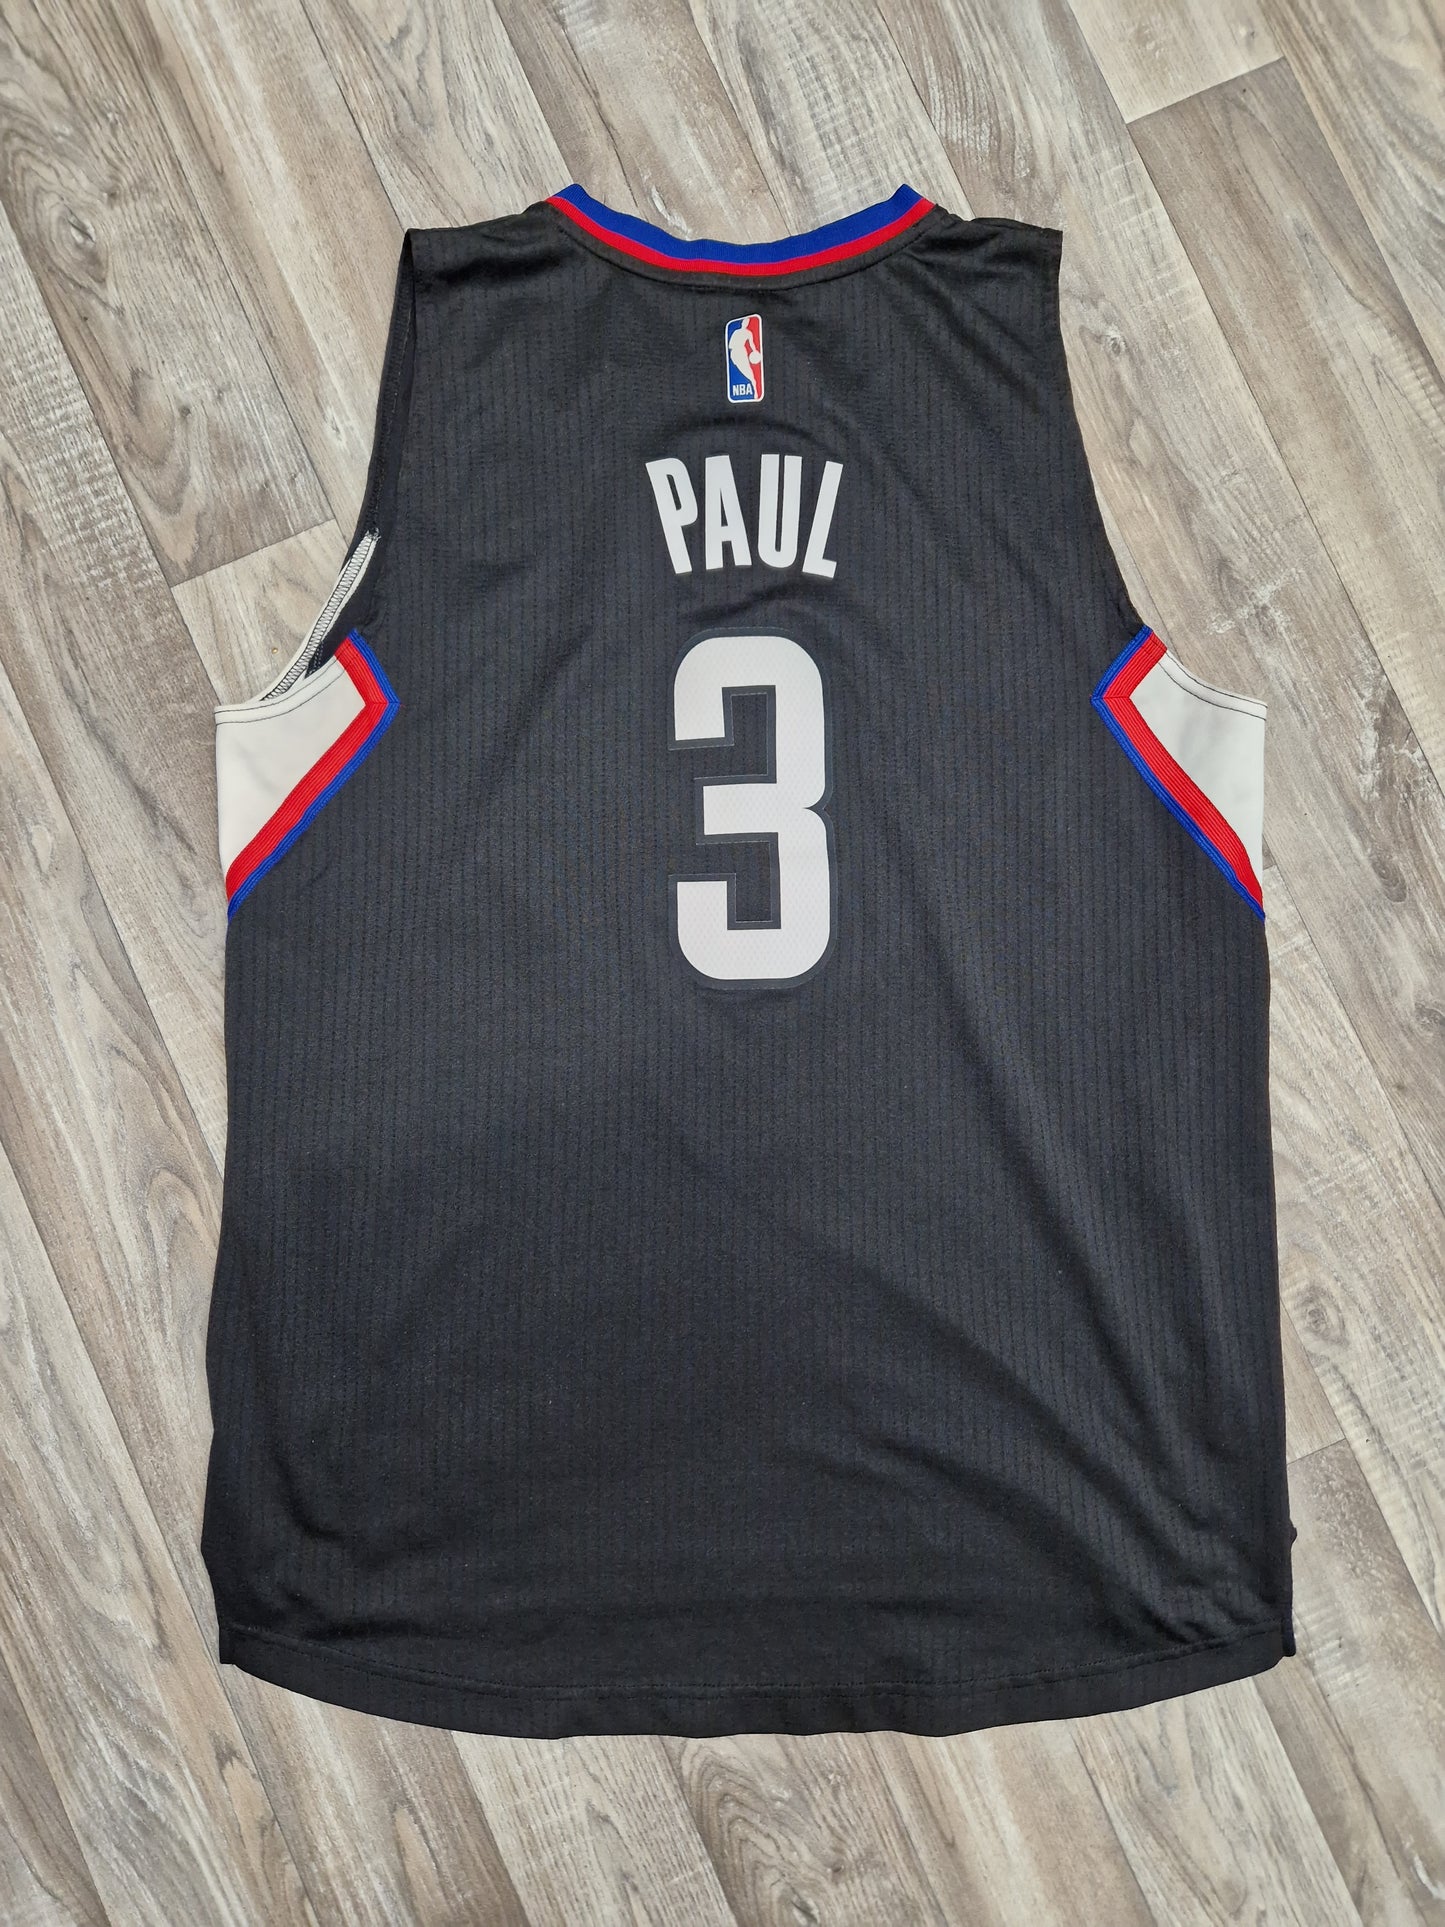 Chris Paul Los Angeles Clippers Jersey Size XL